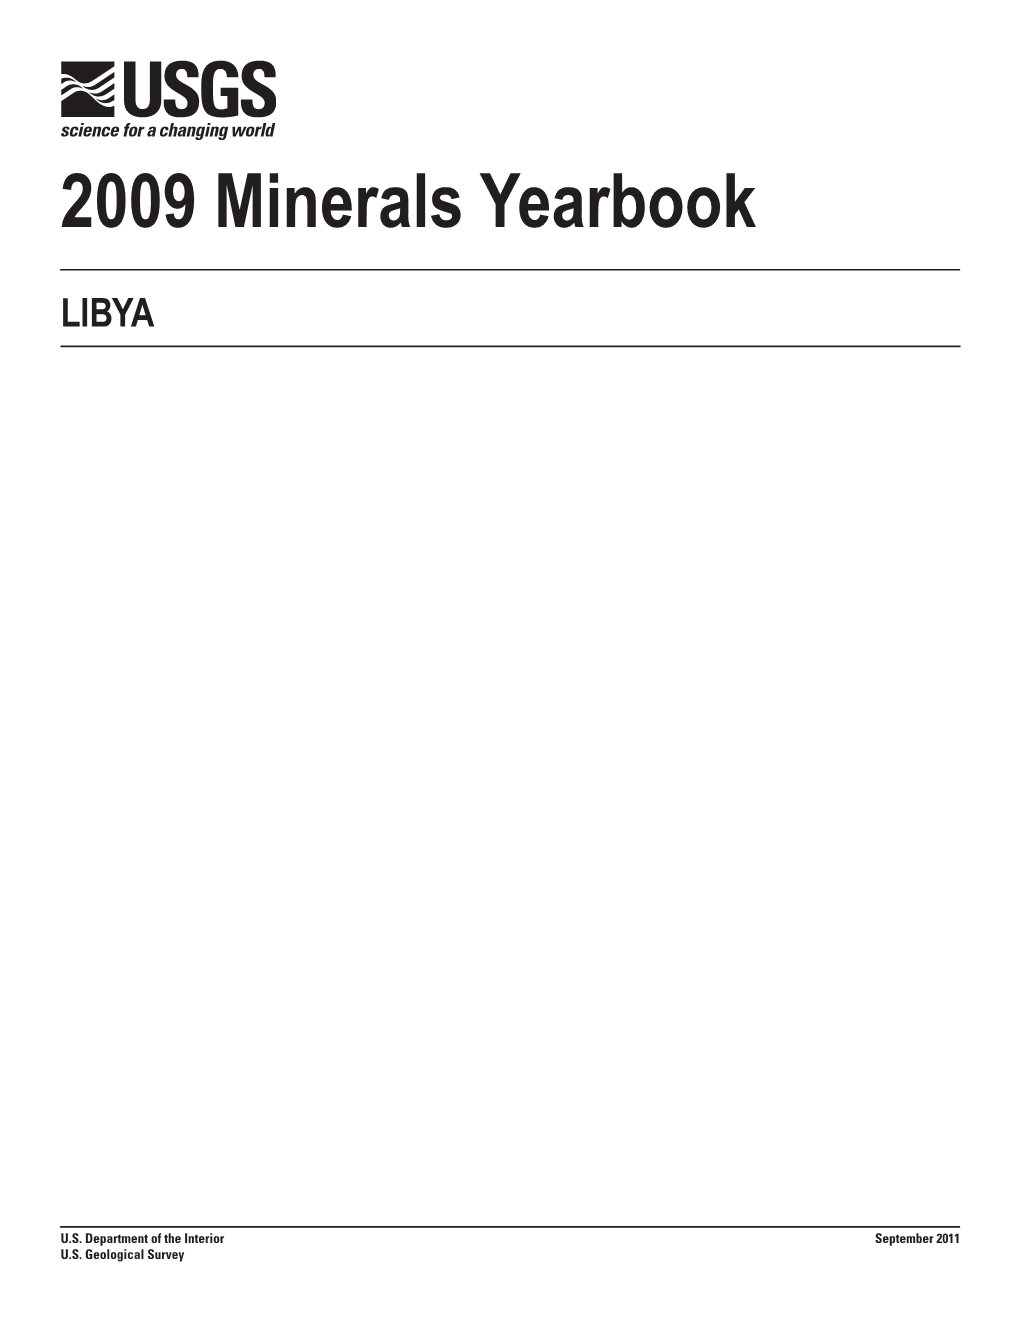 The Mineral Industry of Libya in 2009